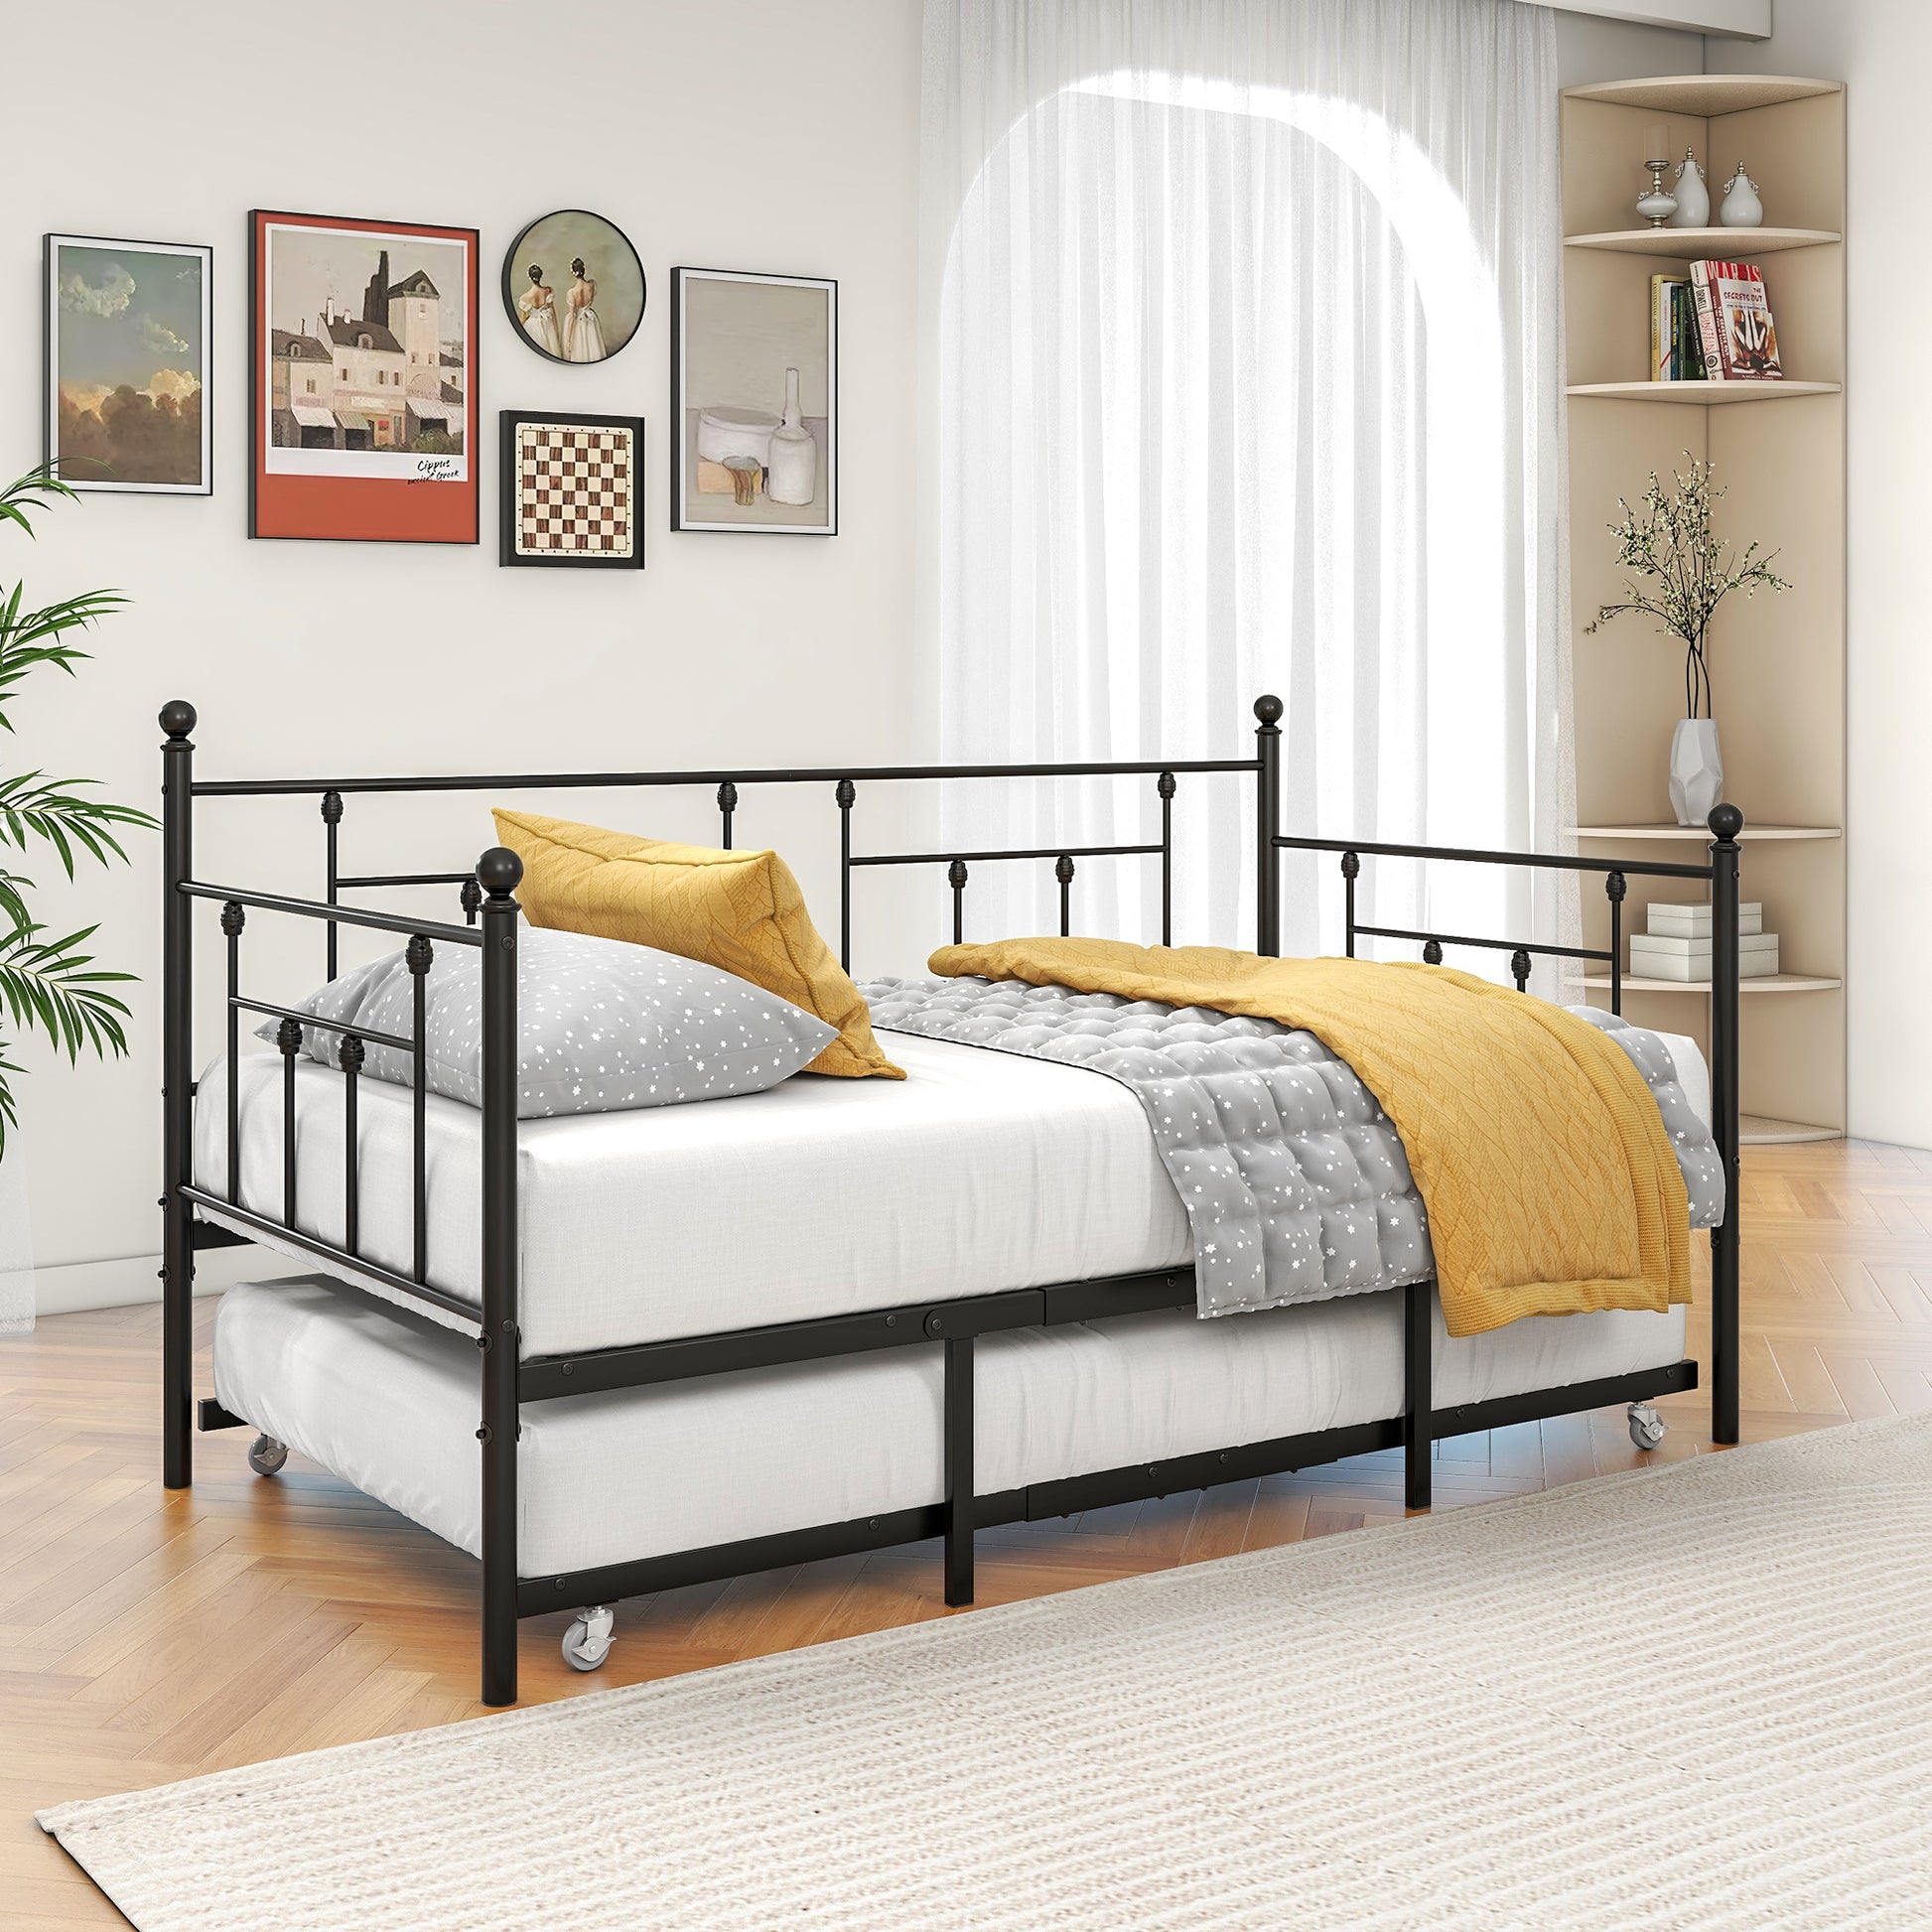 Twin-Sized Full Metal Pull-Out Daybed Bedframe with Trundle No Box Spring_2